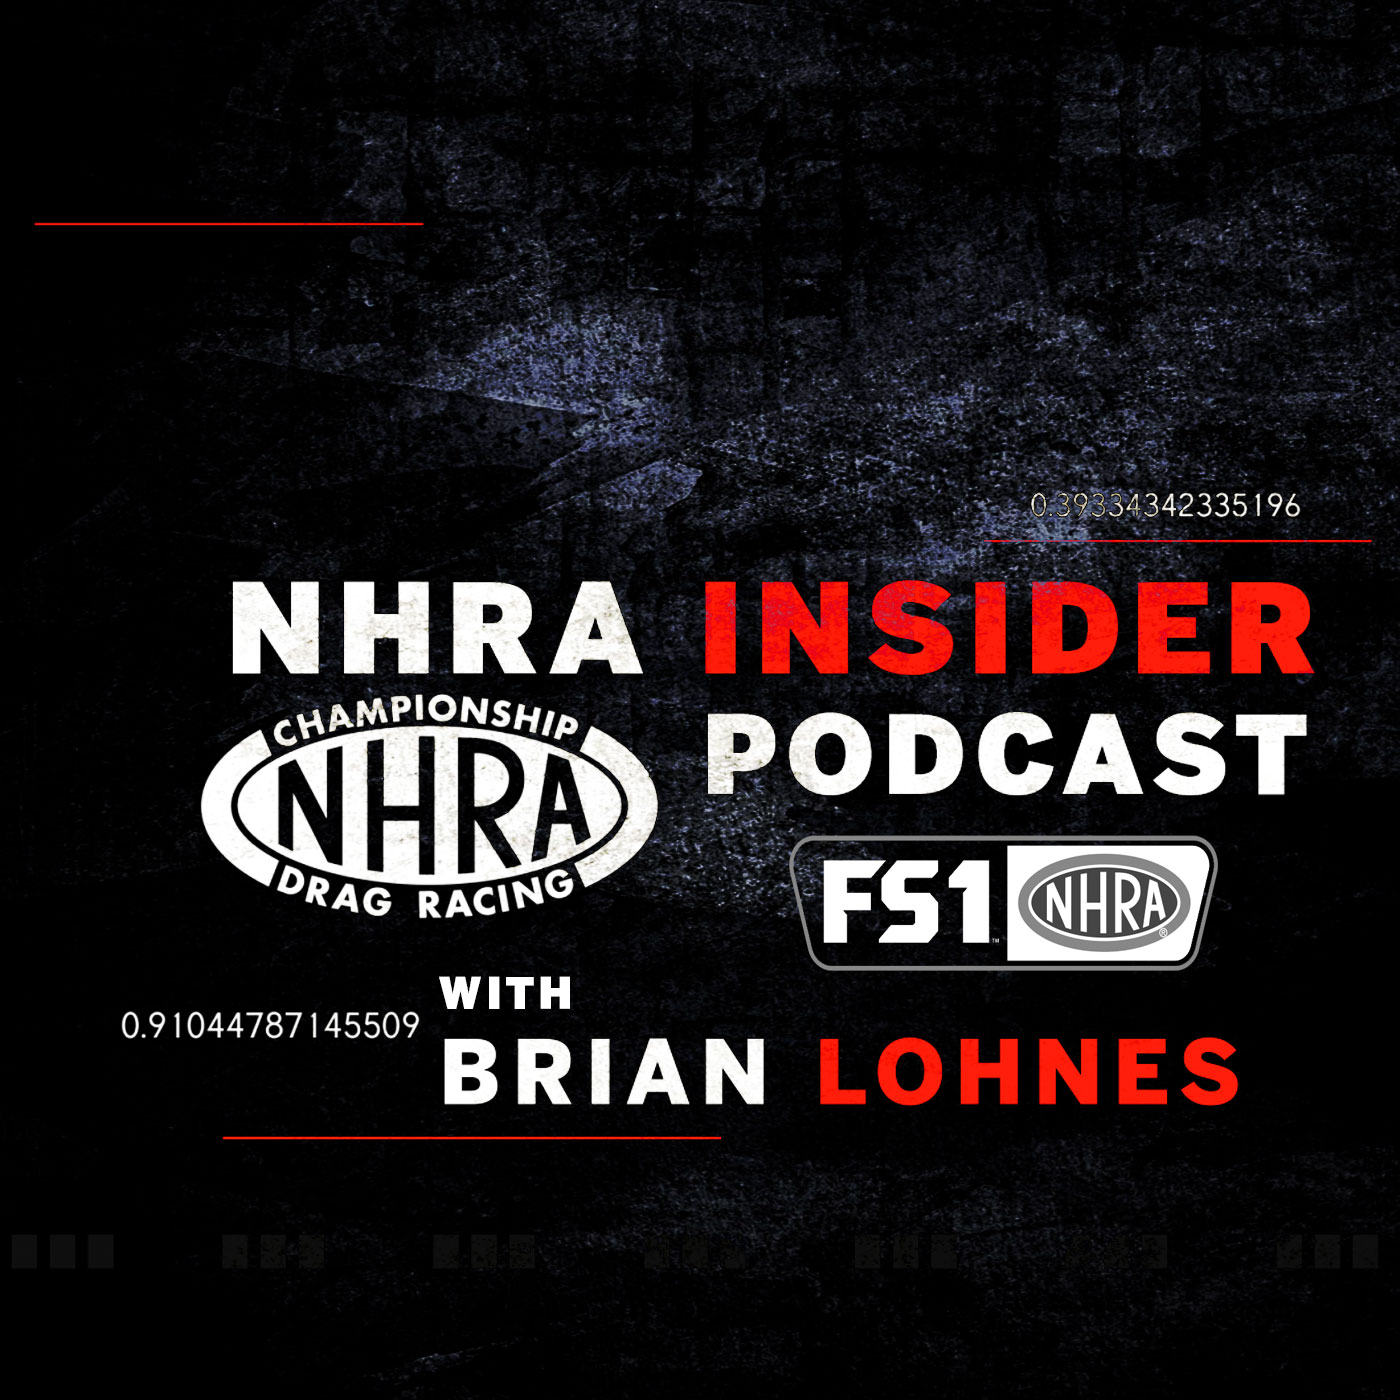 NHRA Insider Podcast: Making A Splash – Talking Four Valve Suzuki Heads With Andrew Hines and The PR Hustle With Elon Werner